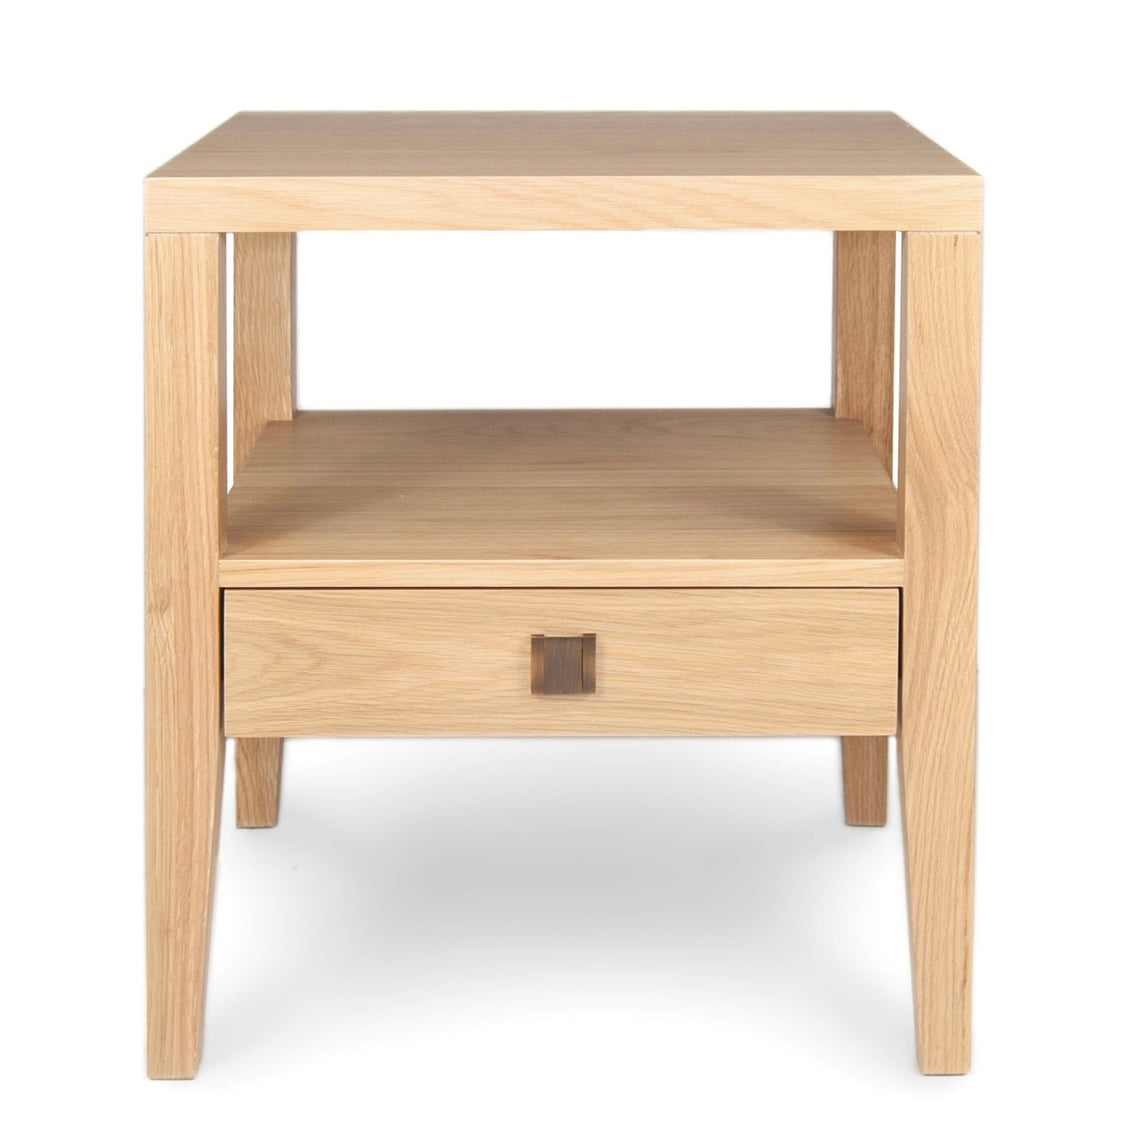 Hara 1 Drawer Accent Table - Oak